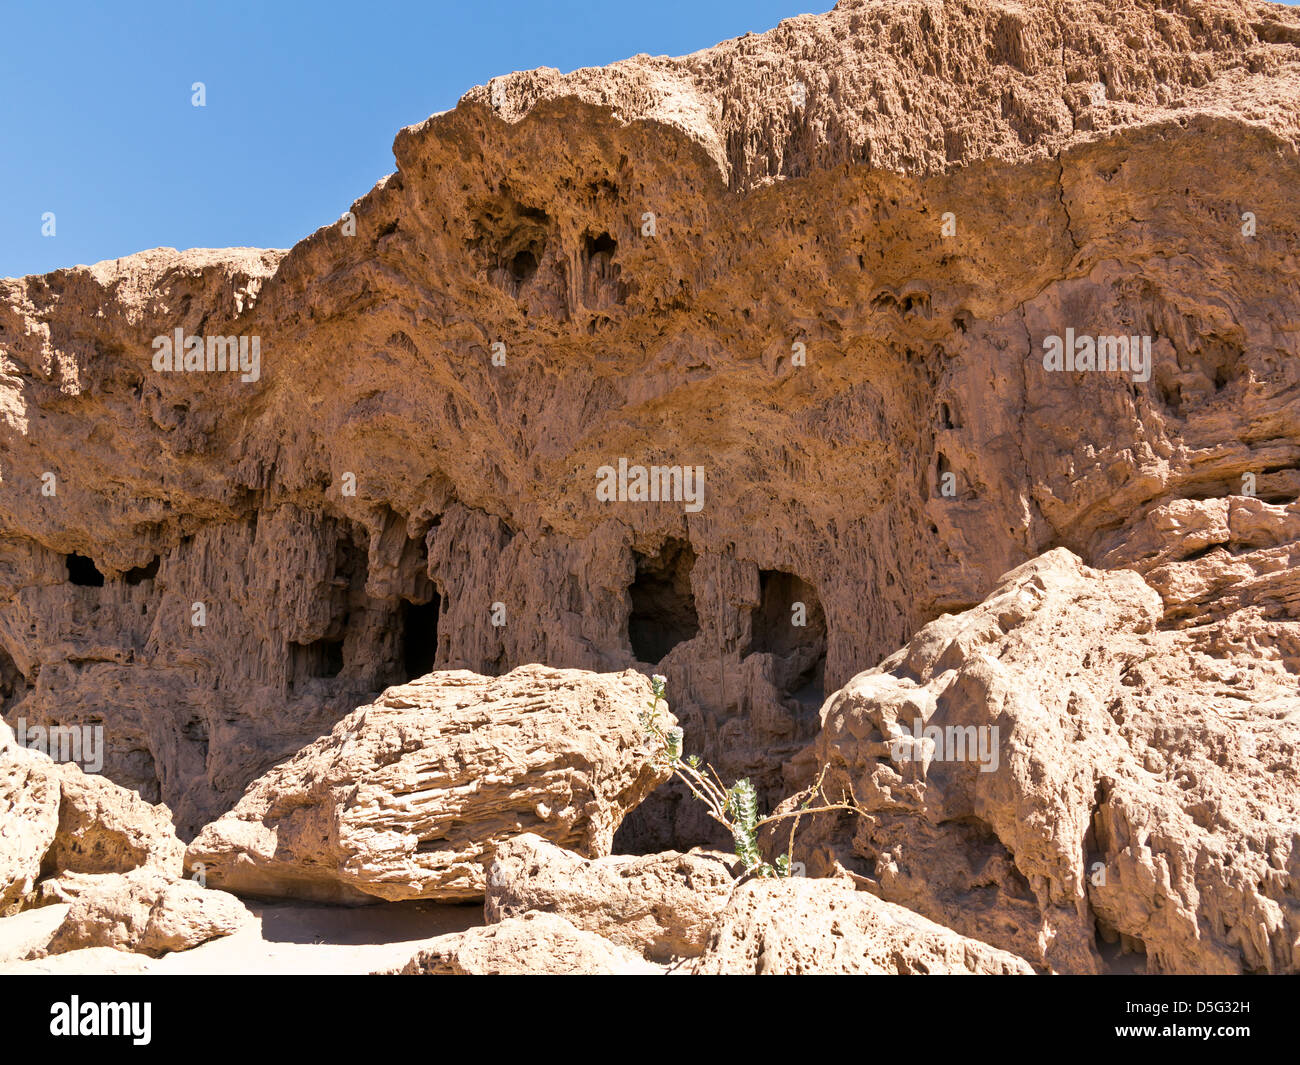 Sea Cave known locally as Grouttes de Messalit, close to Tata, south Anti Atlas Mountains of Morocco Stock Photo